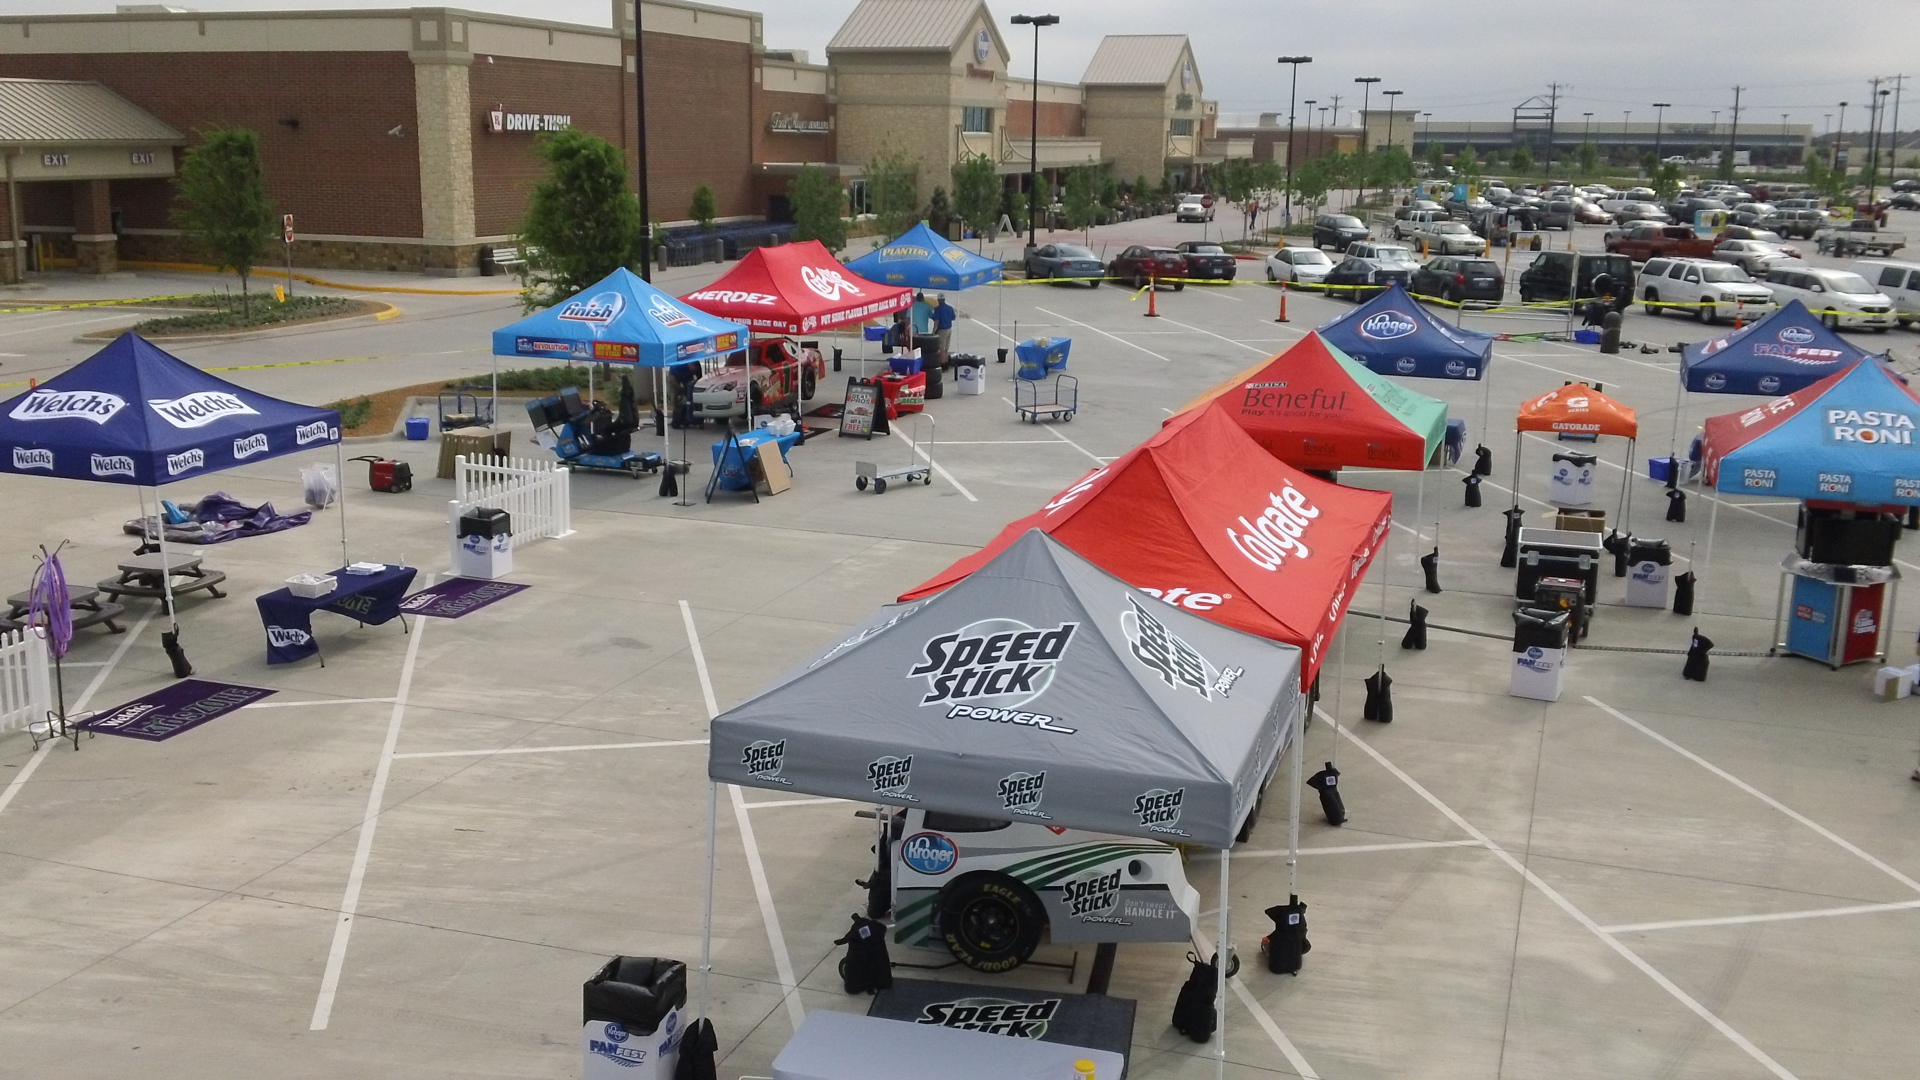 Many red, blue and grey Kroger tents